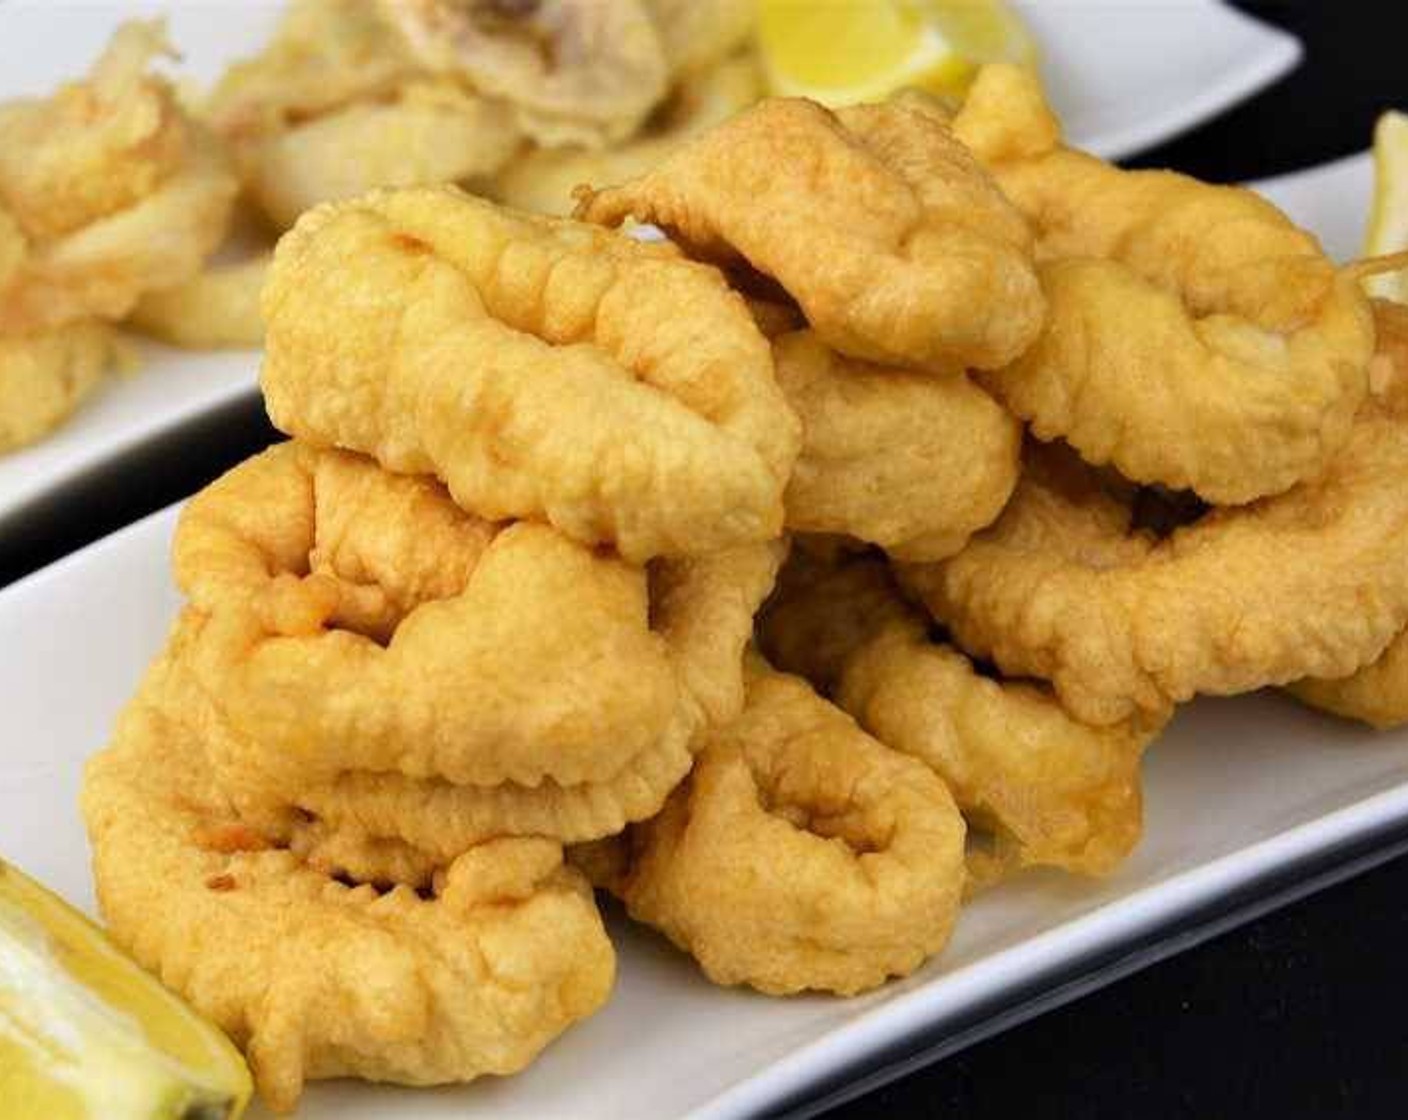 step 7 Squeeze some Lemons (to taste) on the fried calamari and they are ready! Serve and enjoy!